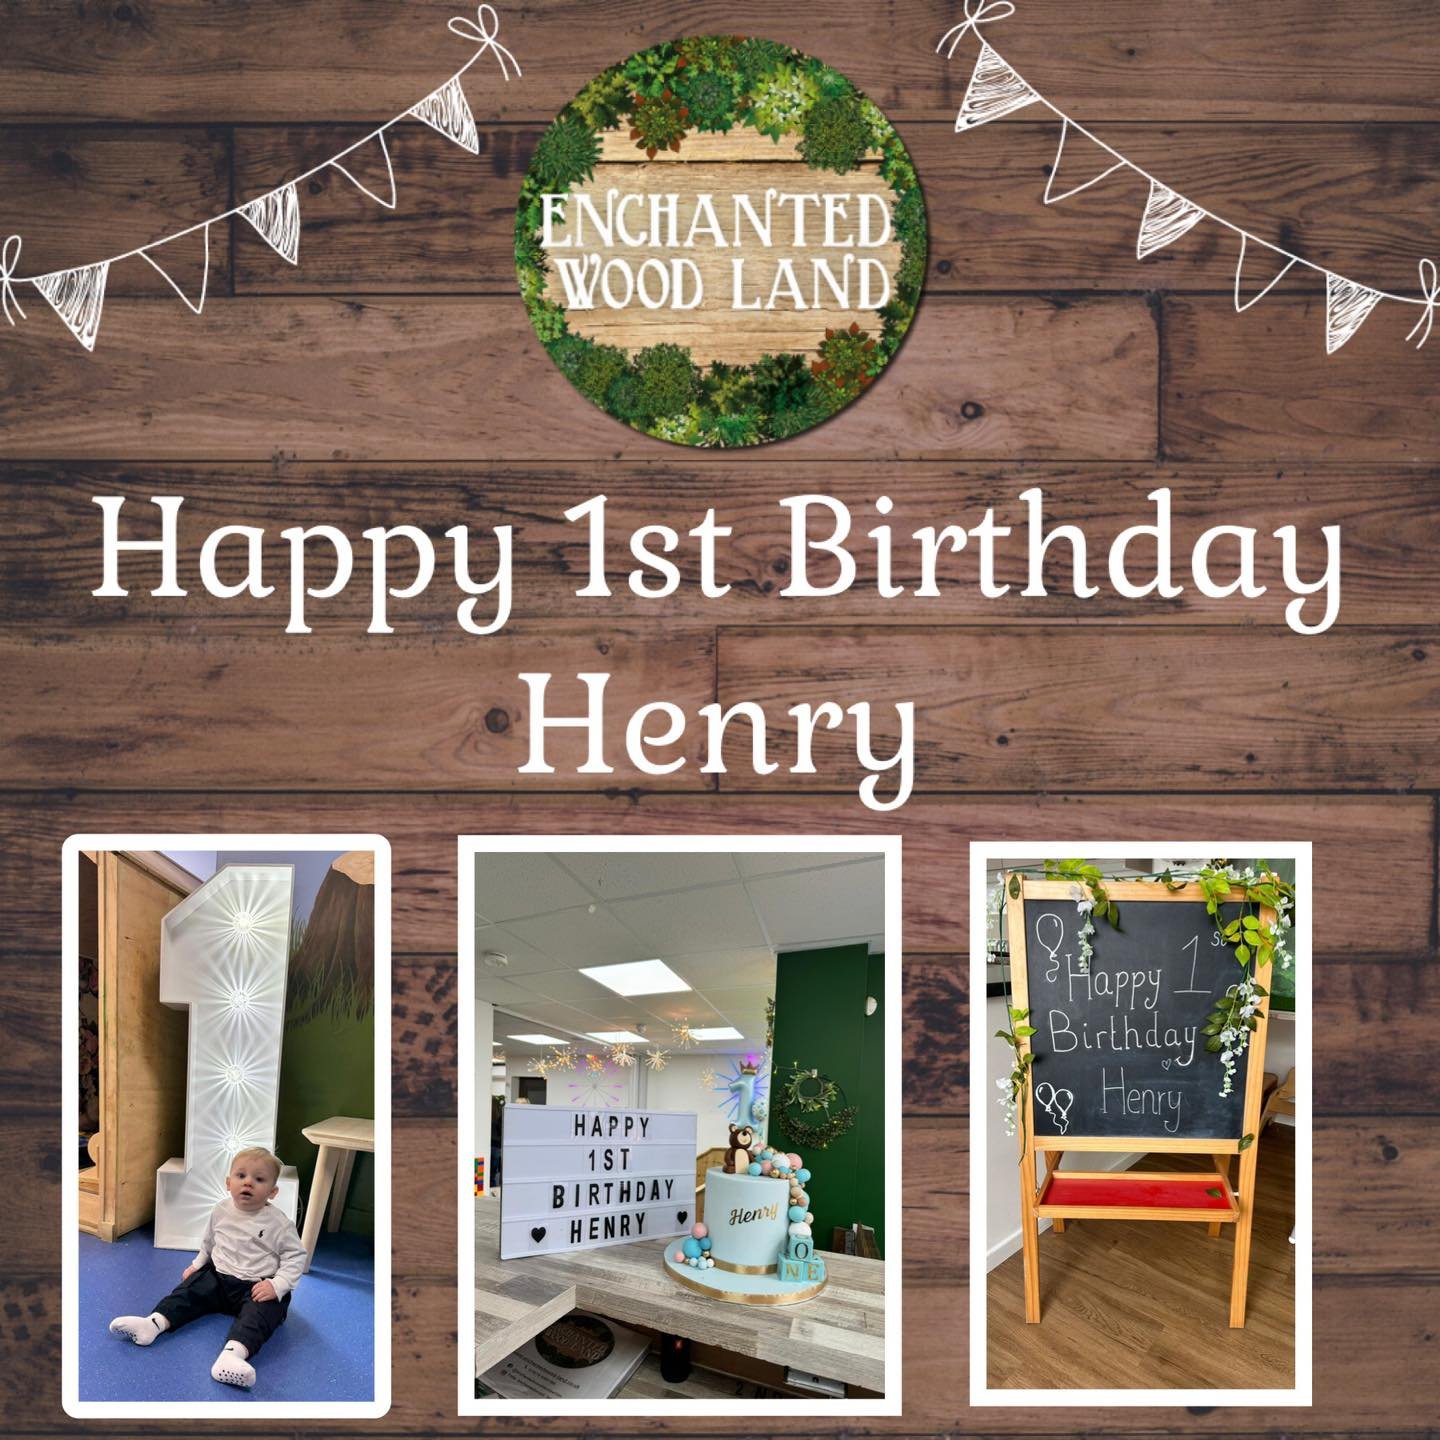 🌳💕Today we celebrated three amazing birthday parties @EnchantedWoodLand! We would like to say a big&hellip; 

💫 &lsquo;Happy 1st Birthday Henry&rsquo;

💫 &lsquo;Happy 2nd Birthday Destan&rsquo;

💫 &lsquo;Happy 4th Birthday Titus&rsquo;

We hope 